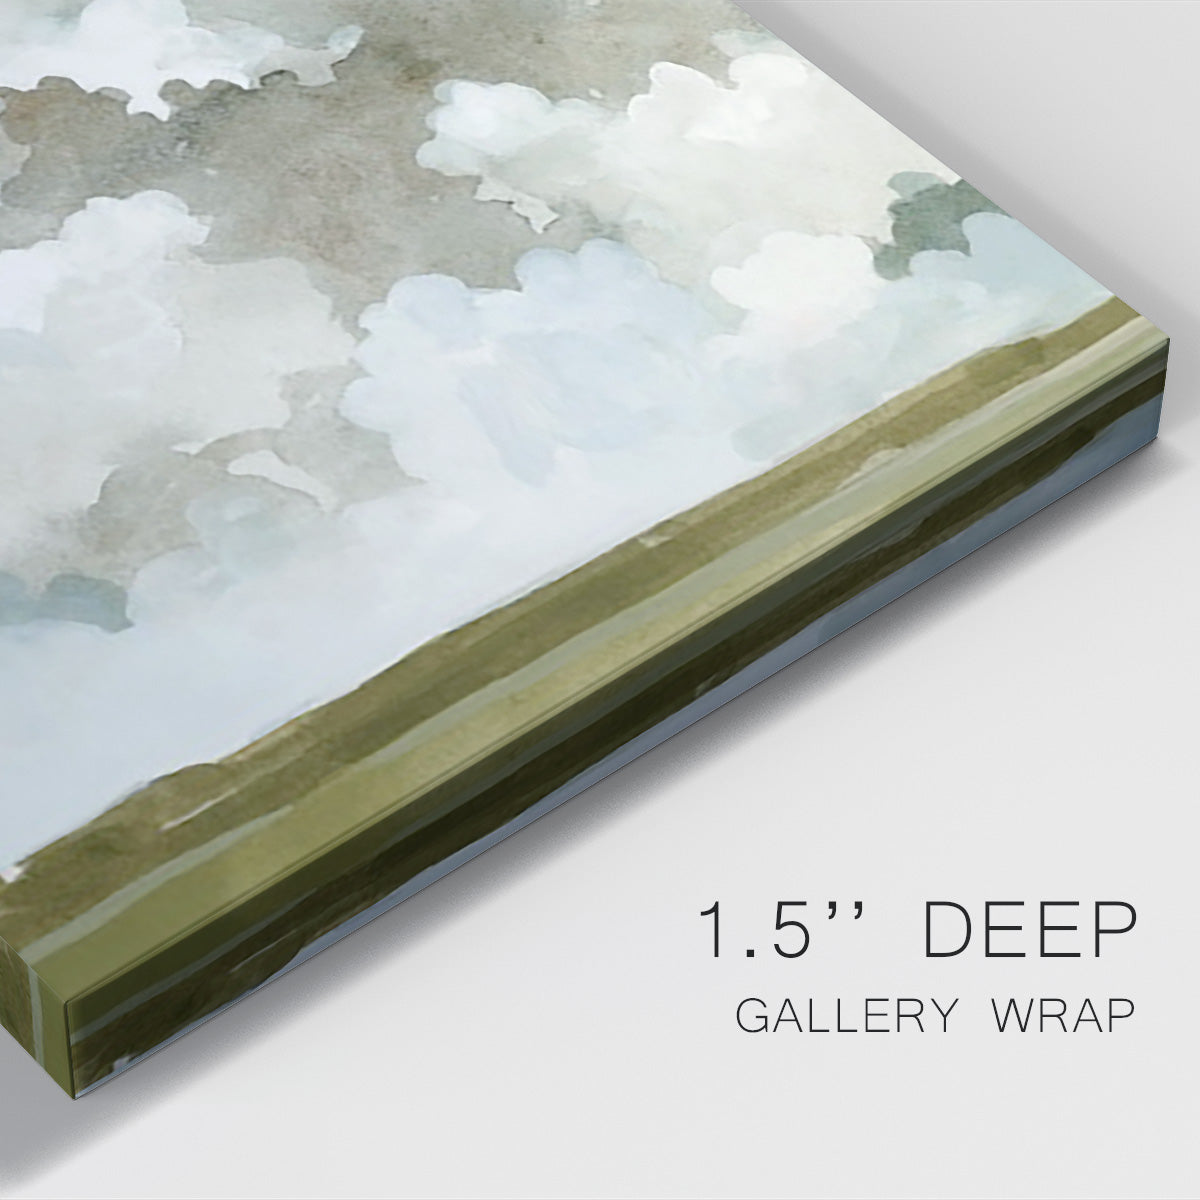 Vast Neutral Sky I Premium Gallery Wrapped Canvas - Ready to Hang